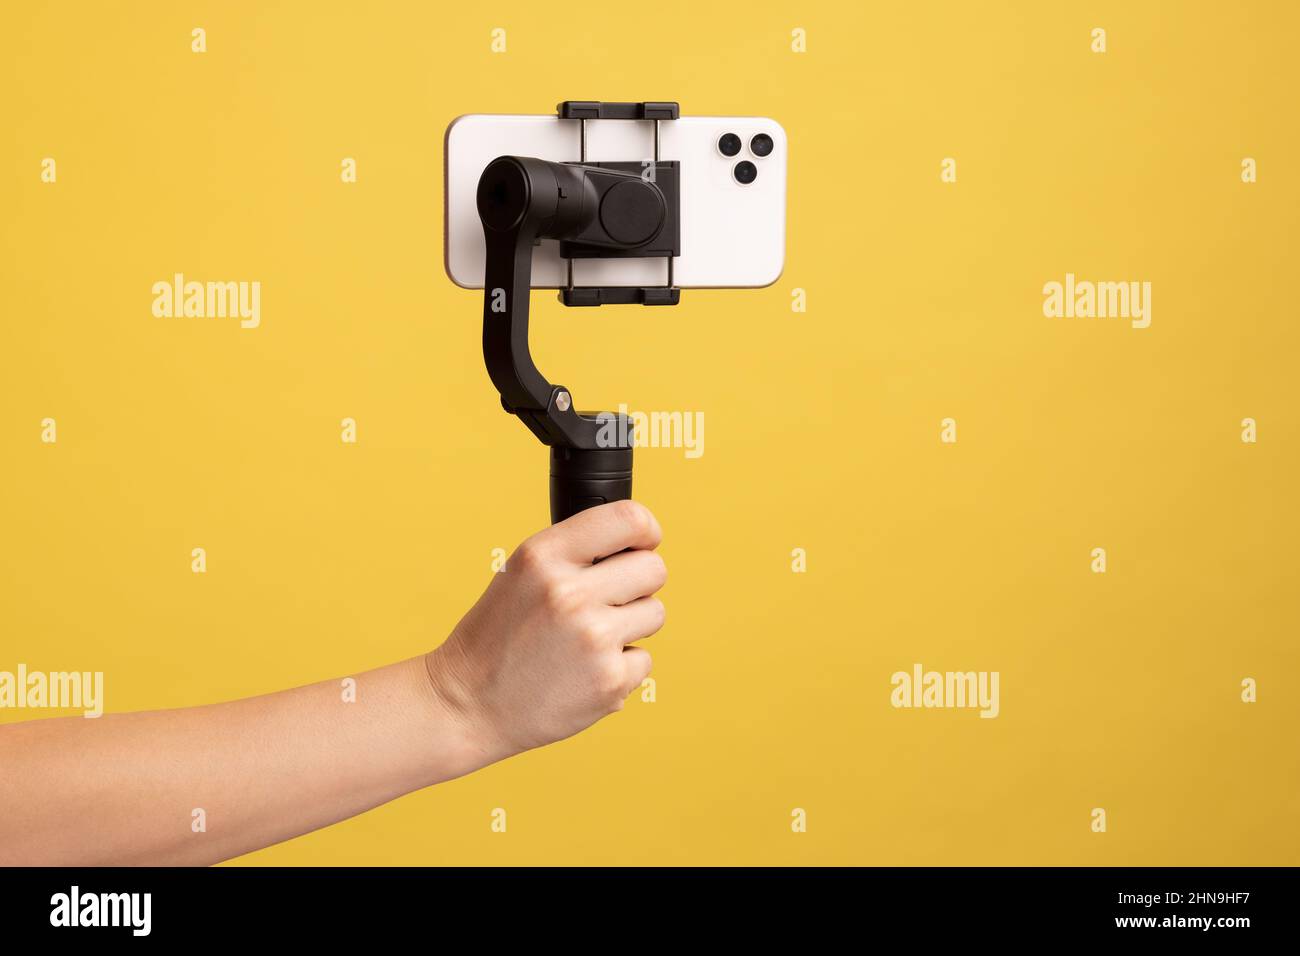 Closeup side view of woman hand holding steadicam with phone, for making video or has livestream. Indoor studio shot isolated on yellow background. Stock Photo